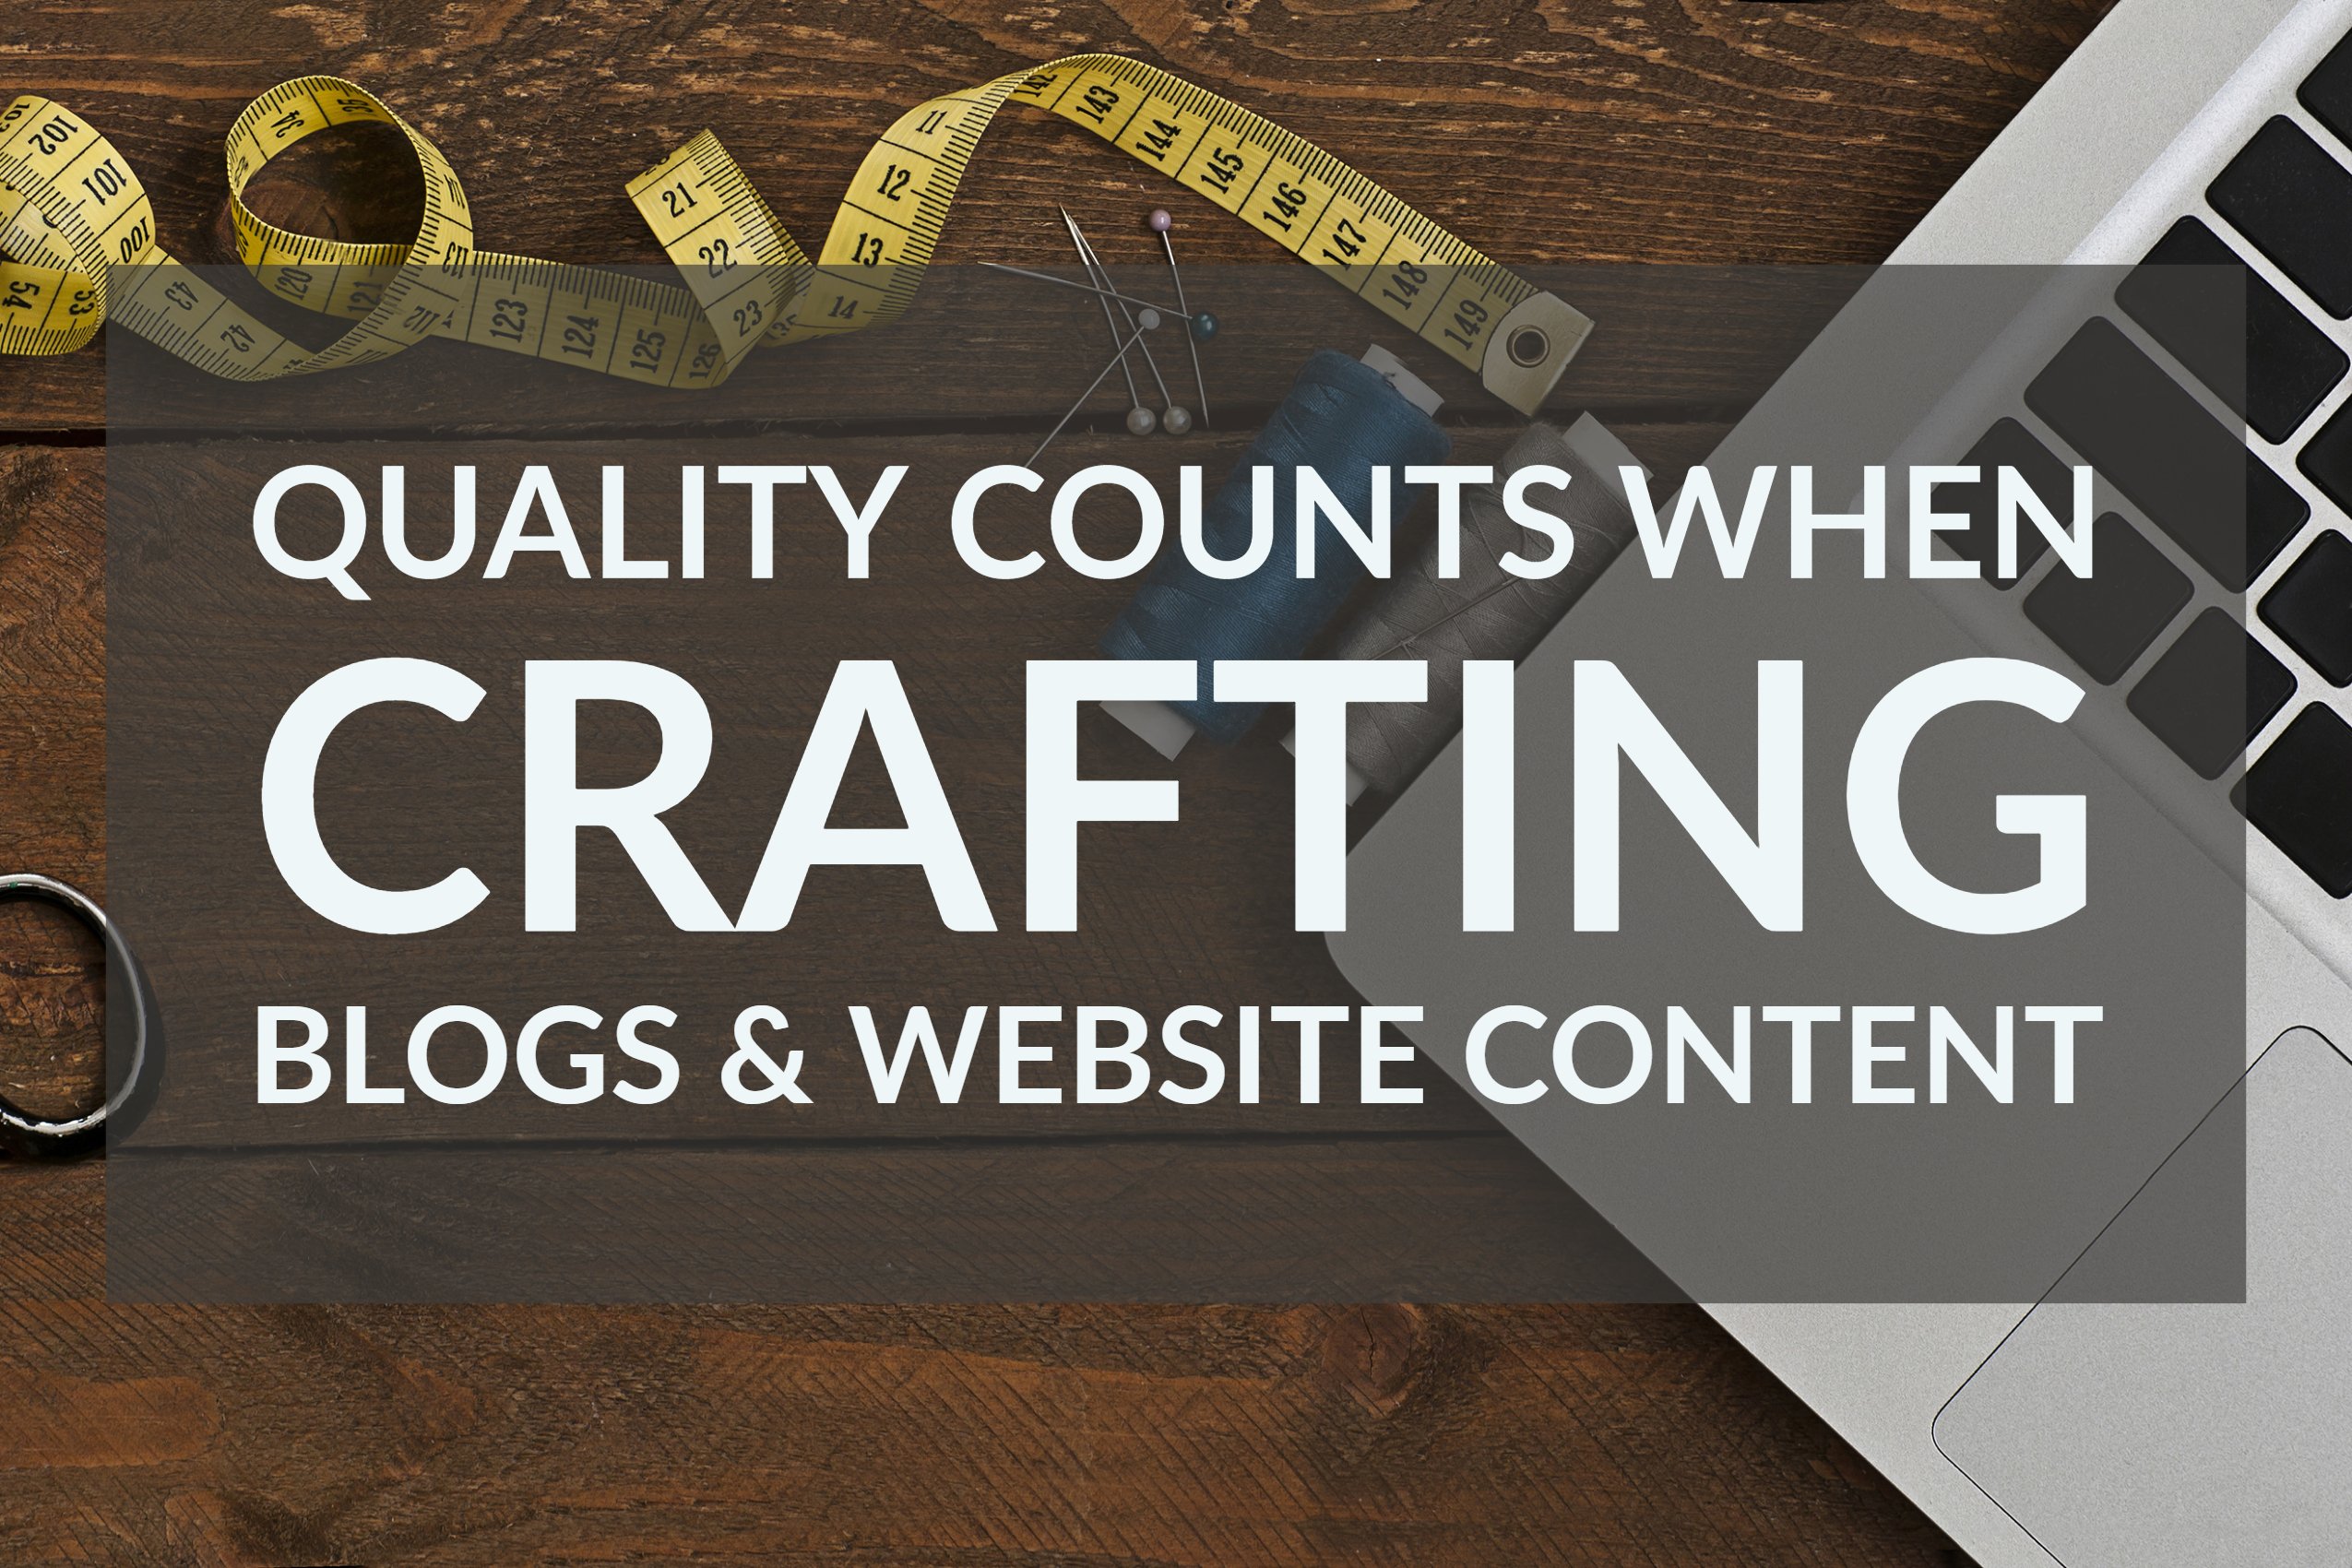 Quality Counts When Crafting Blogs & Website Content